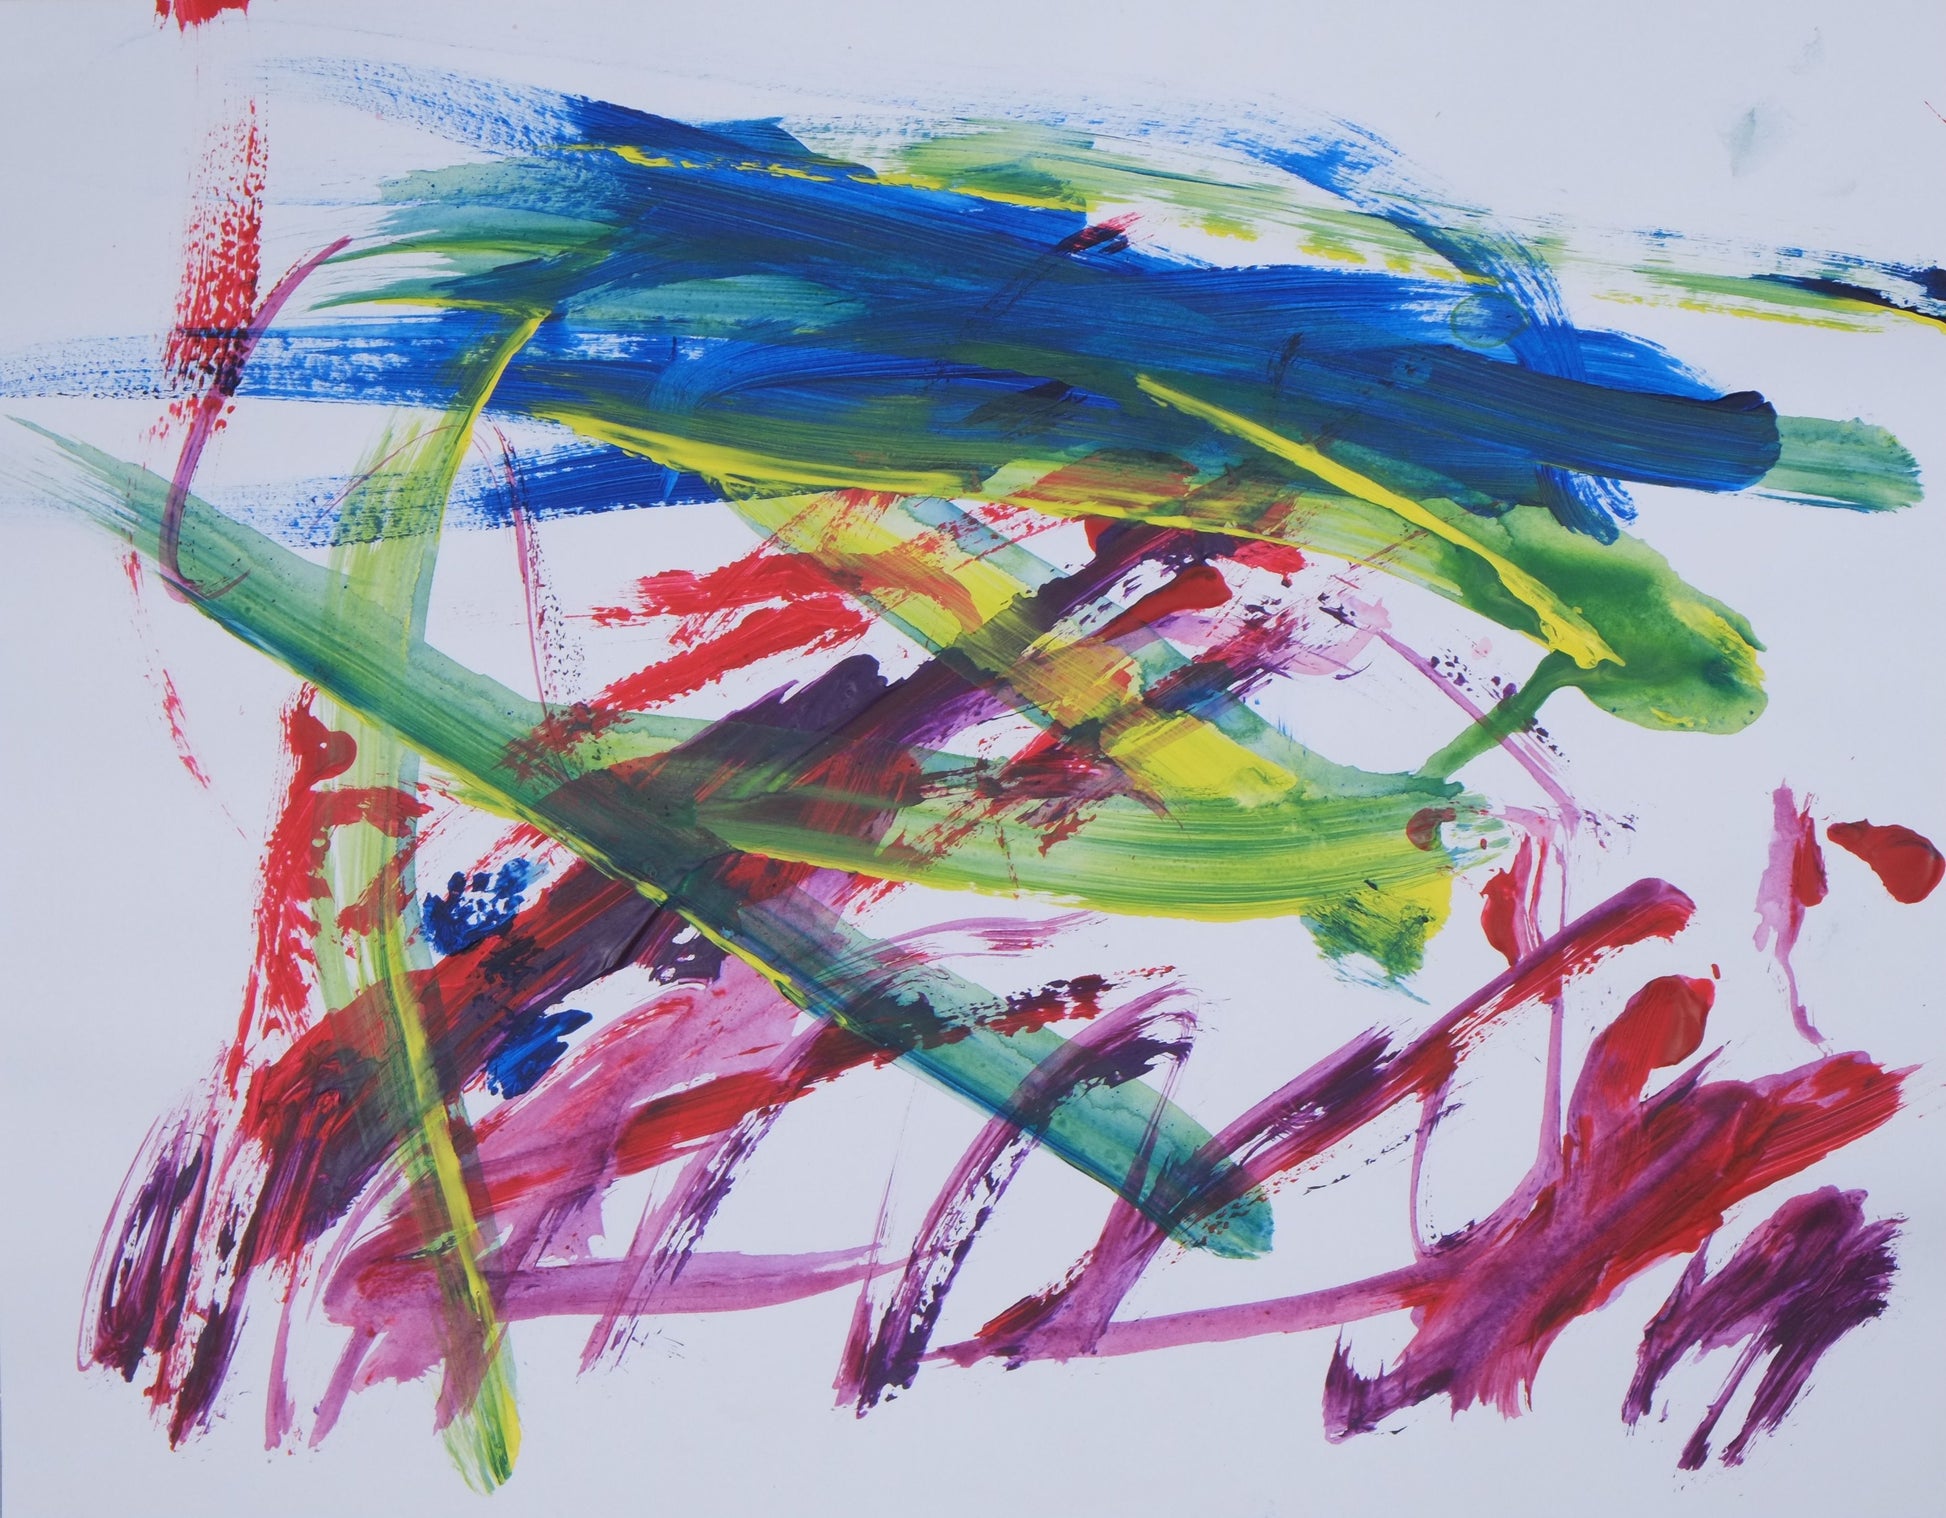 Acrylic on paper artwork with long brush strokes of blue, green and yellow in a horizontal pattern and pink, purple and red in a slanted pattern against a white background